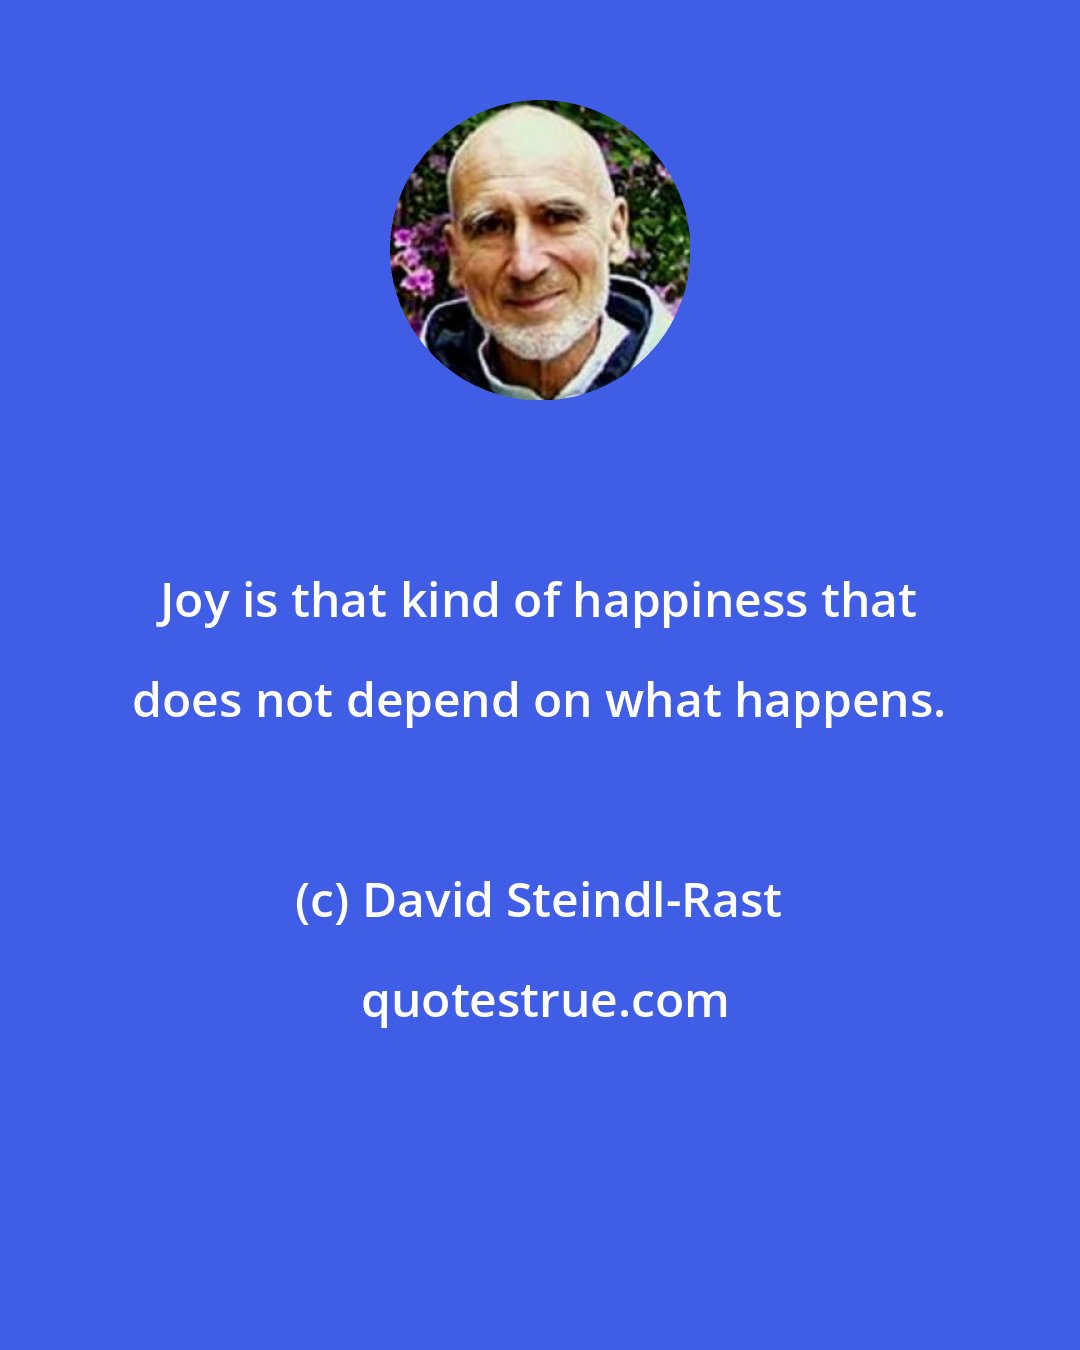 David Steindl-Rast: Joy is that kind of happiness that does not depend on what happens.